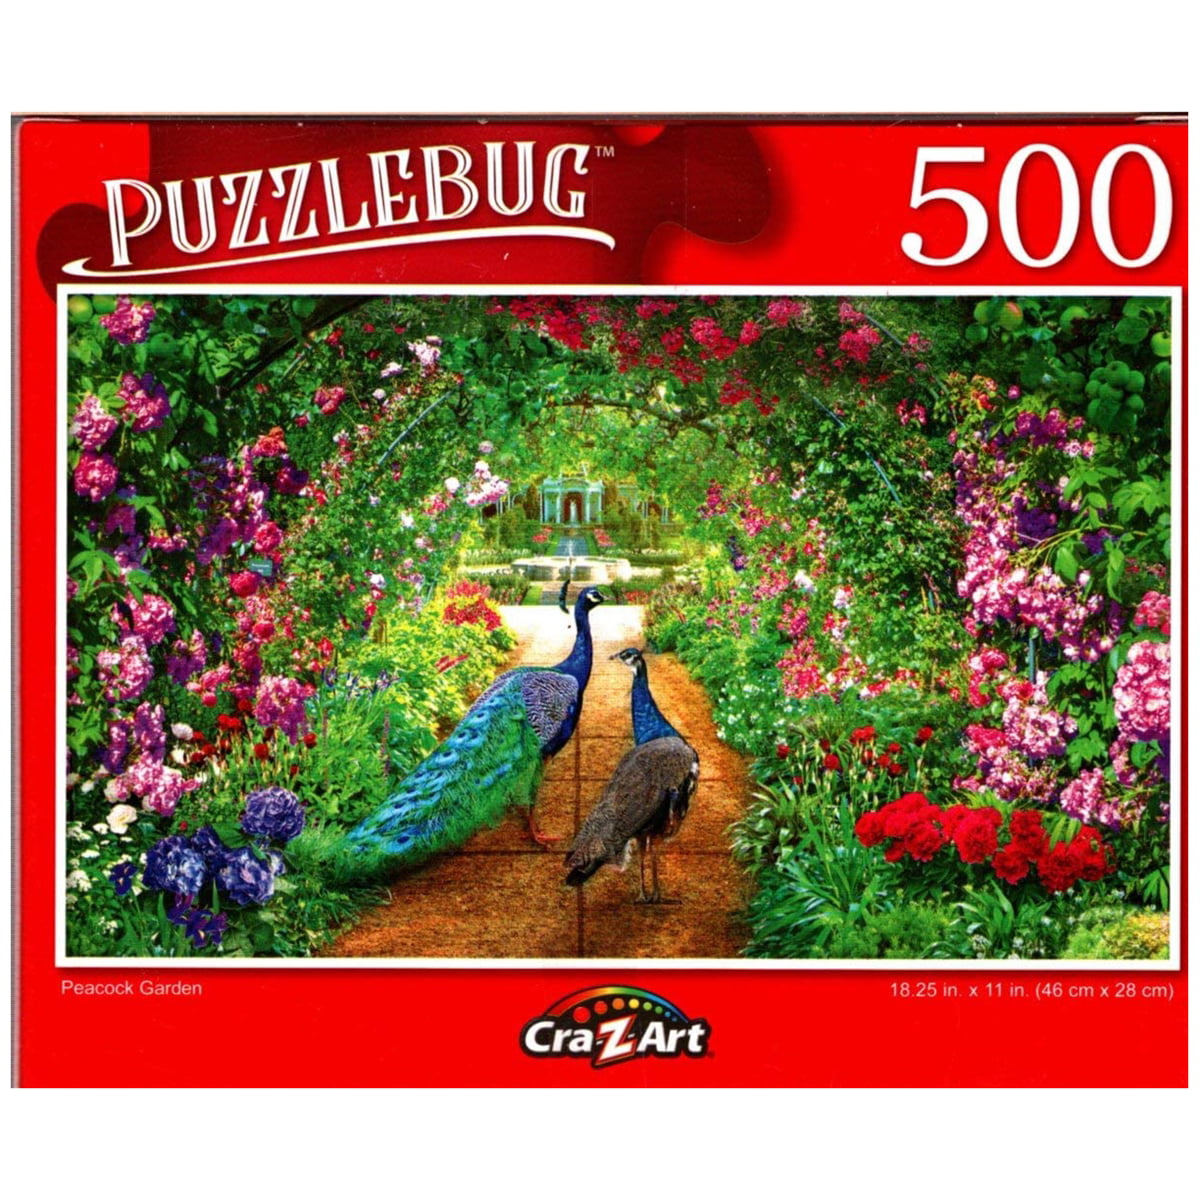 Checking in at The Grand Peacock 1000 Piece Puzzle